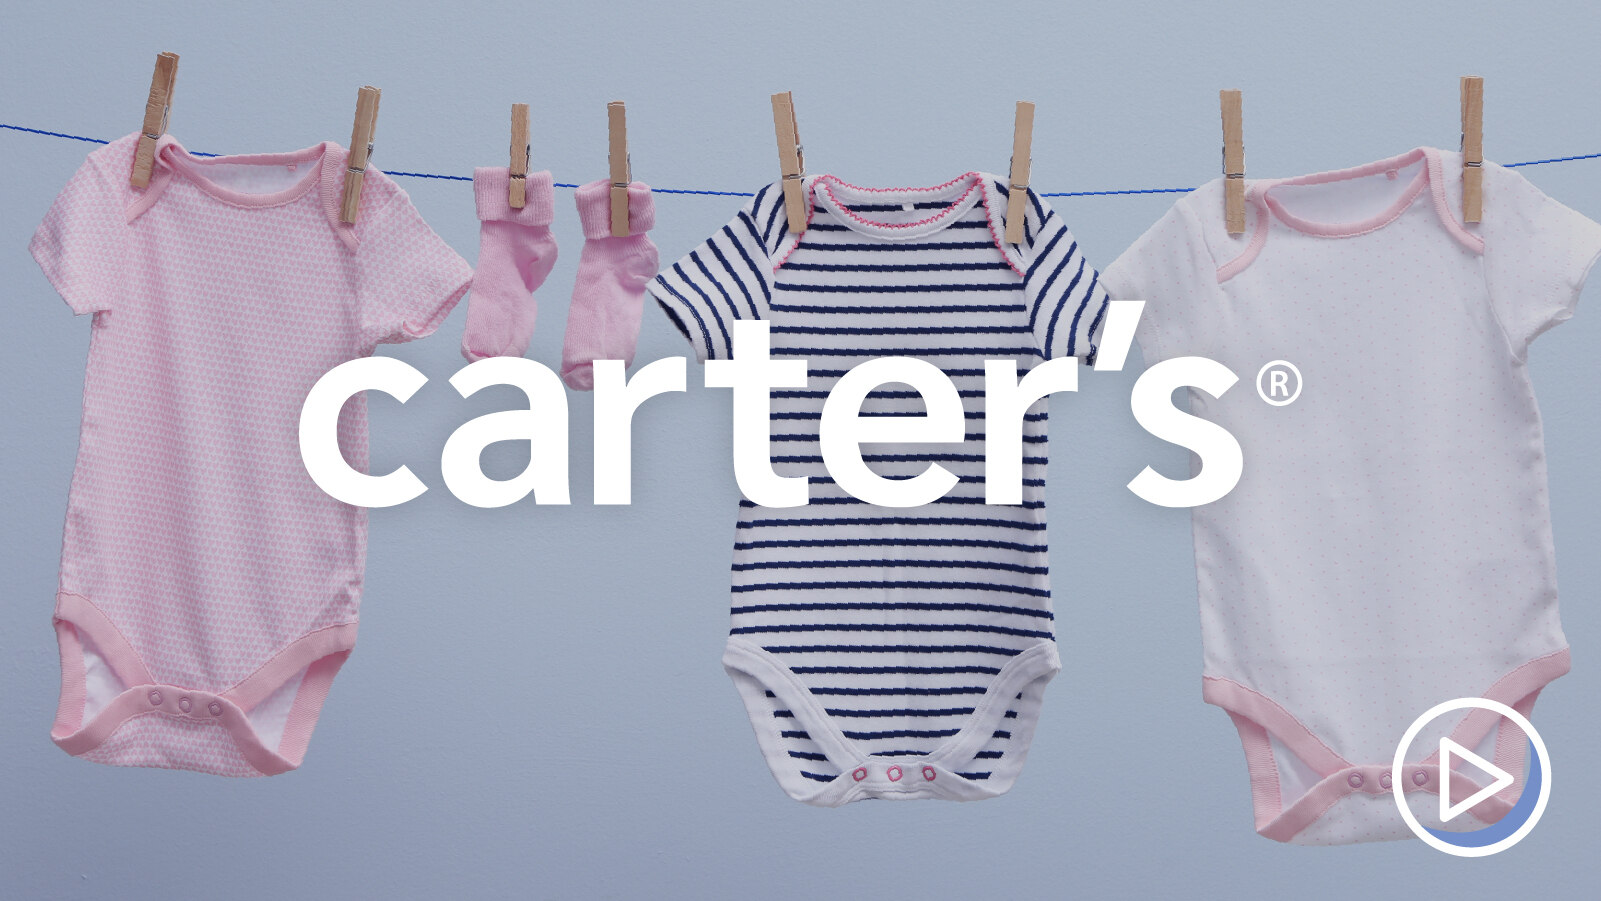 Graphic: Carter's logo on top of baby clothing on clothing line